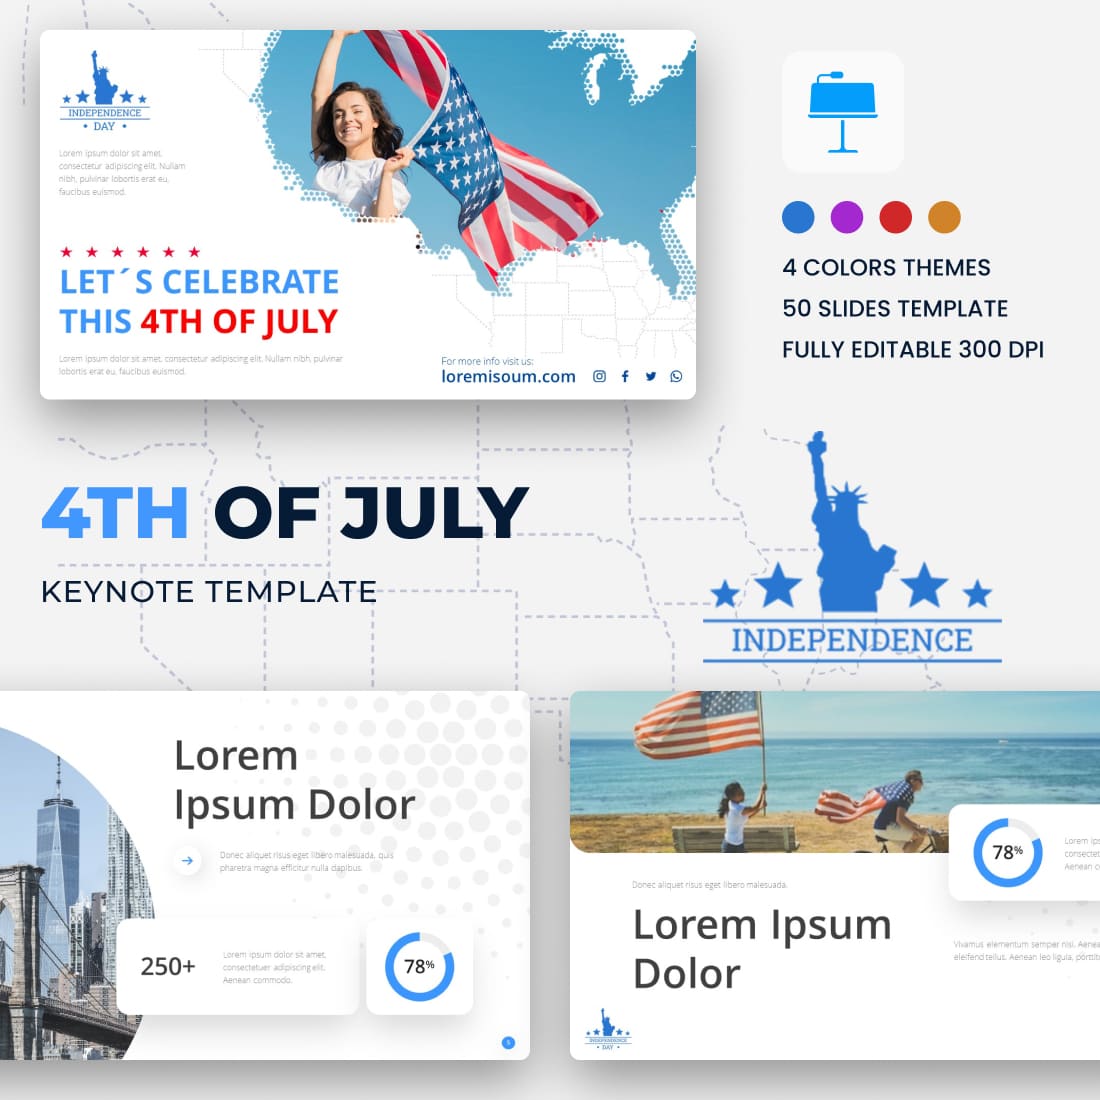 4th Of July Keynote Template.